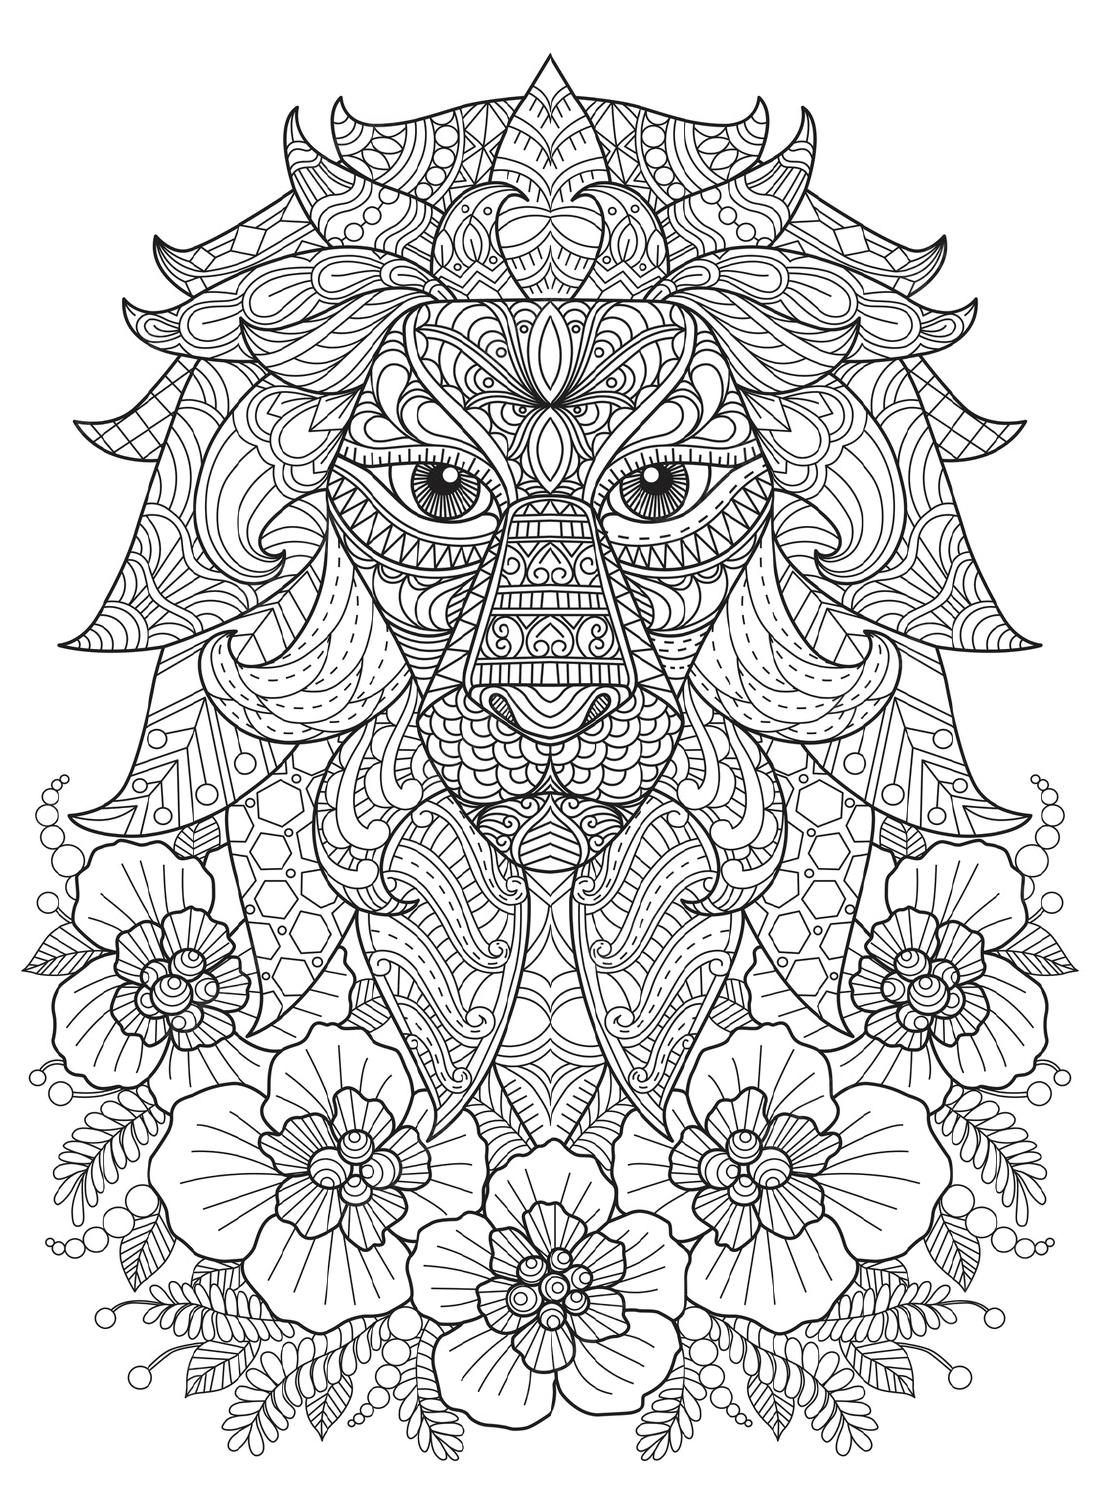 Zentangle Lion and Flower from Zentangle Animal